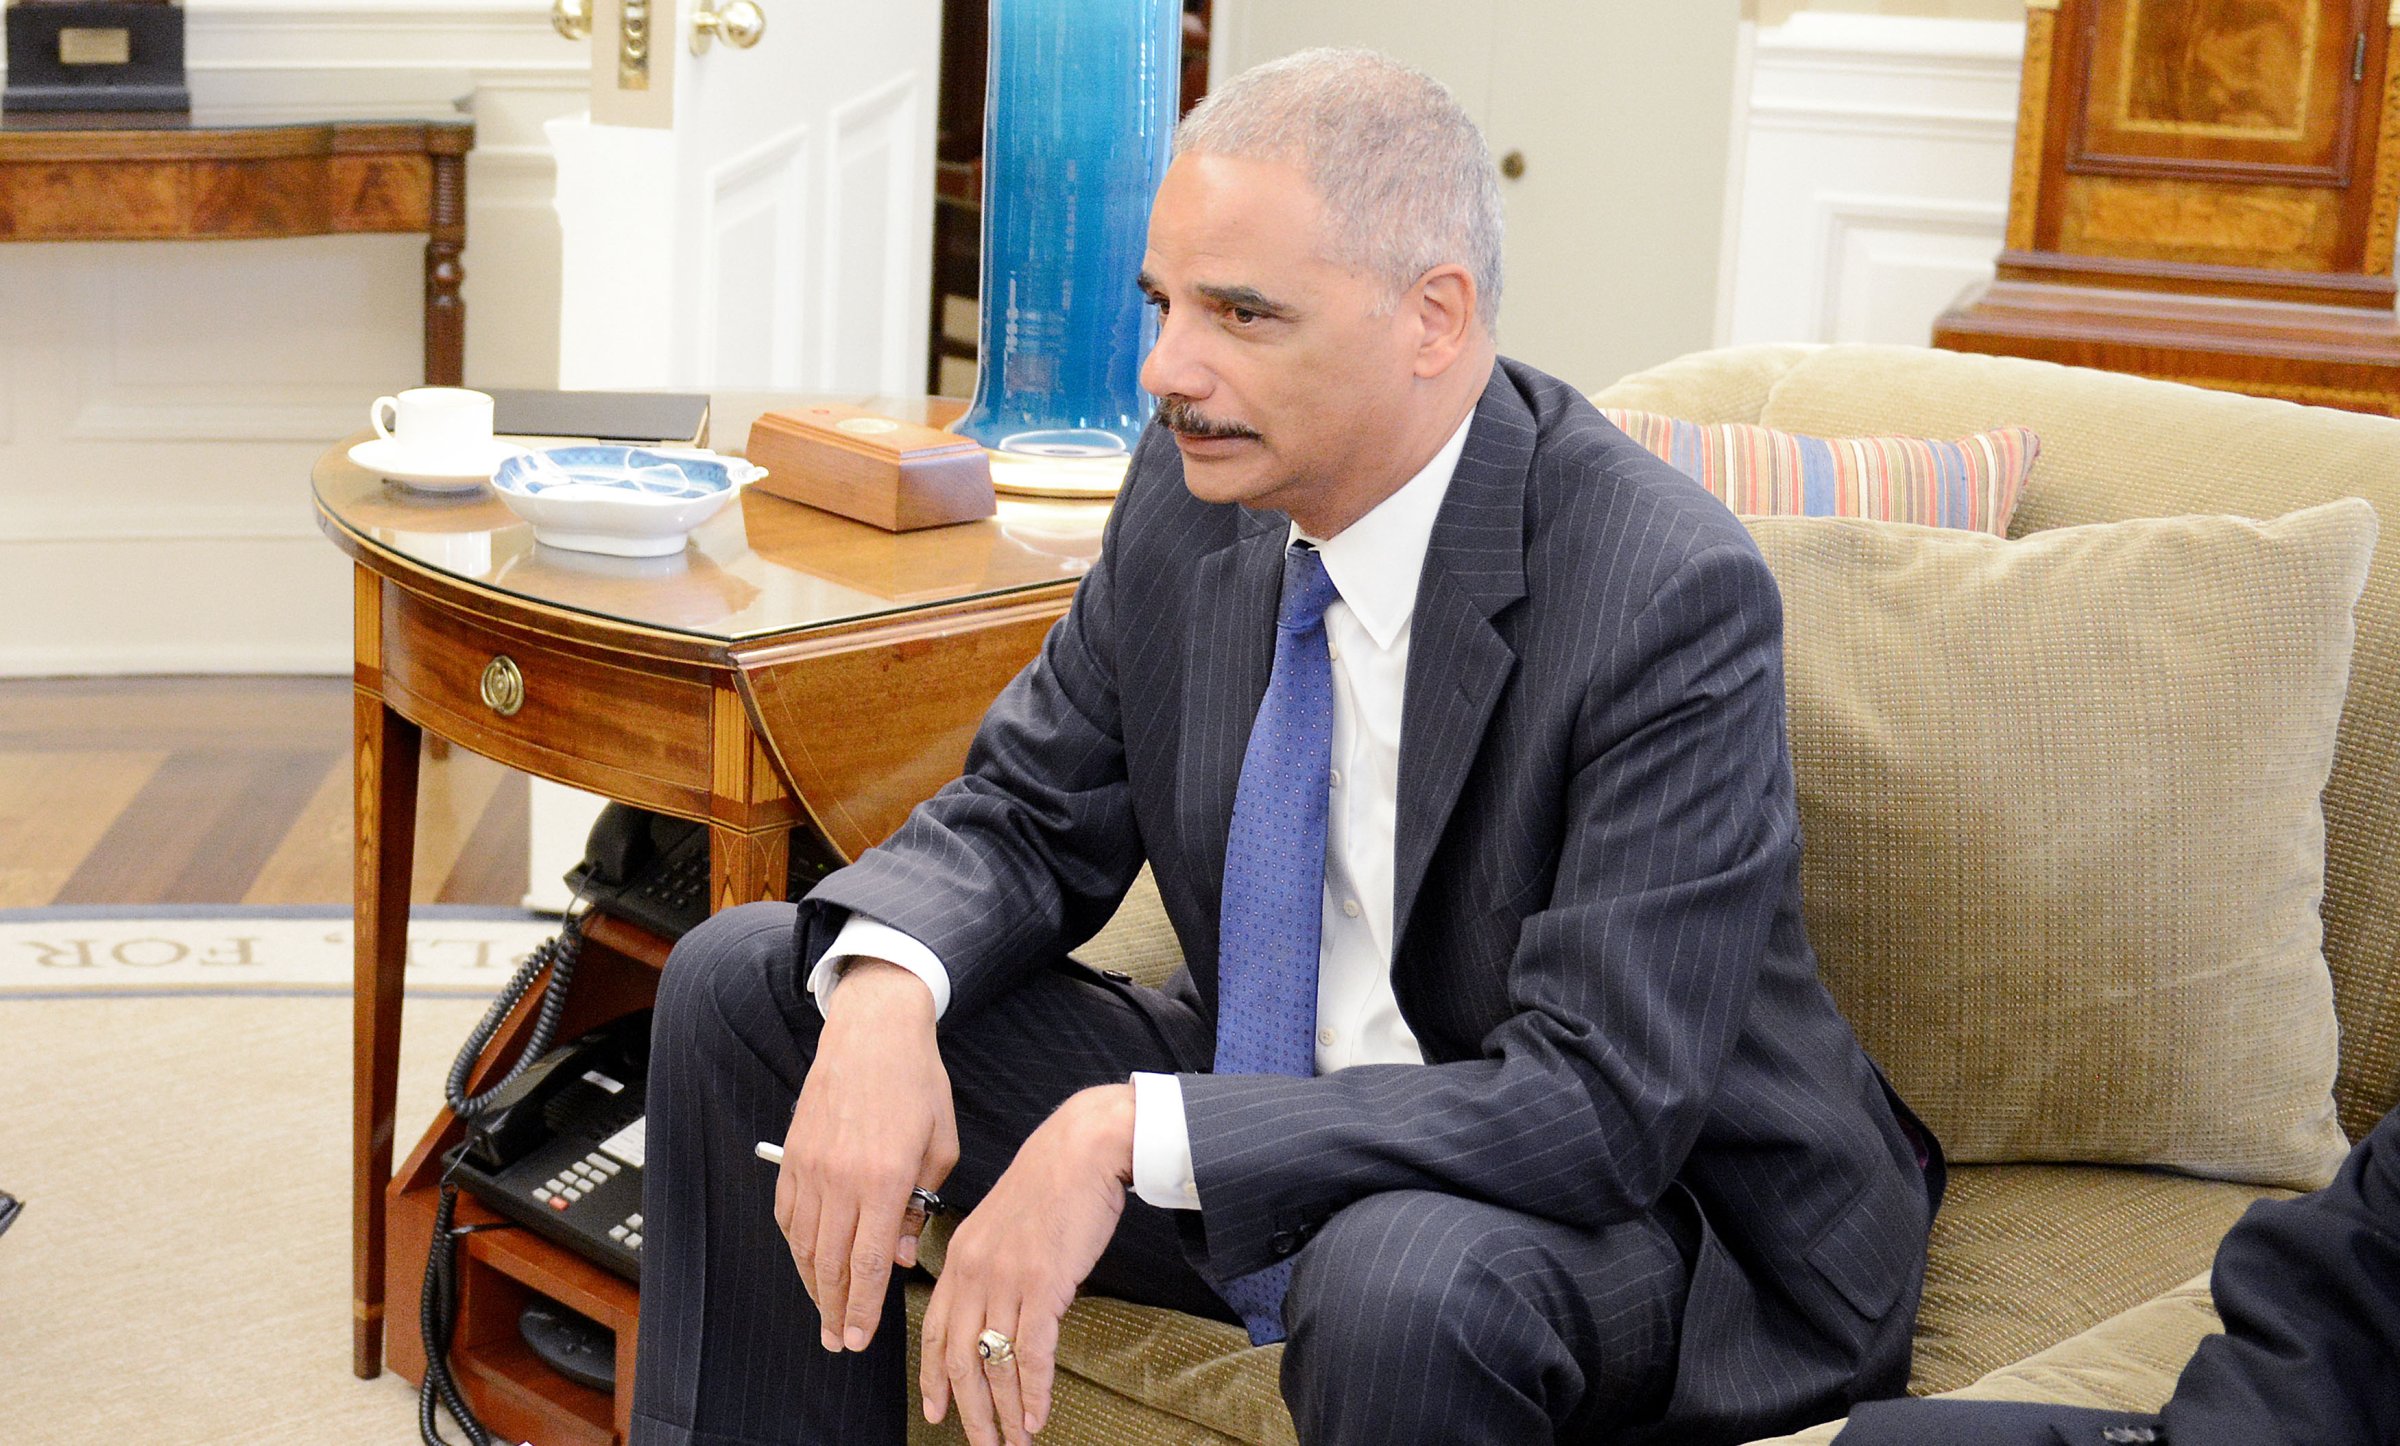 Obama Meets Holder About the Situation in Ferguson